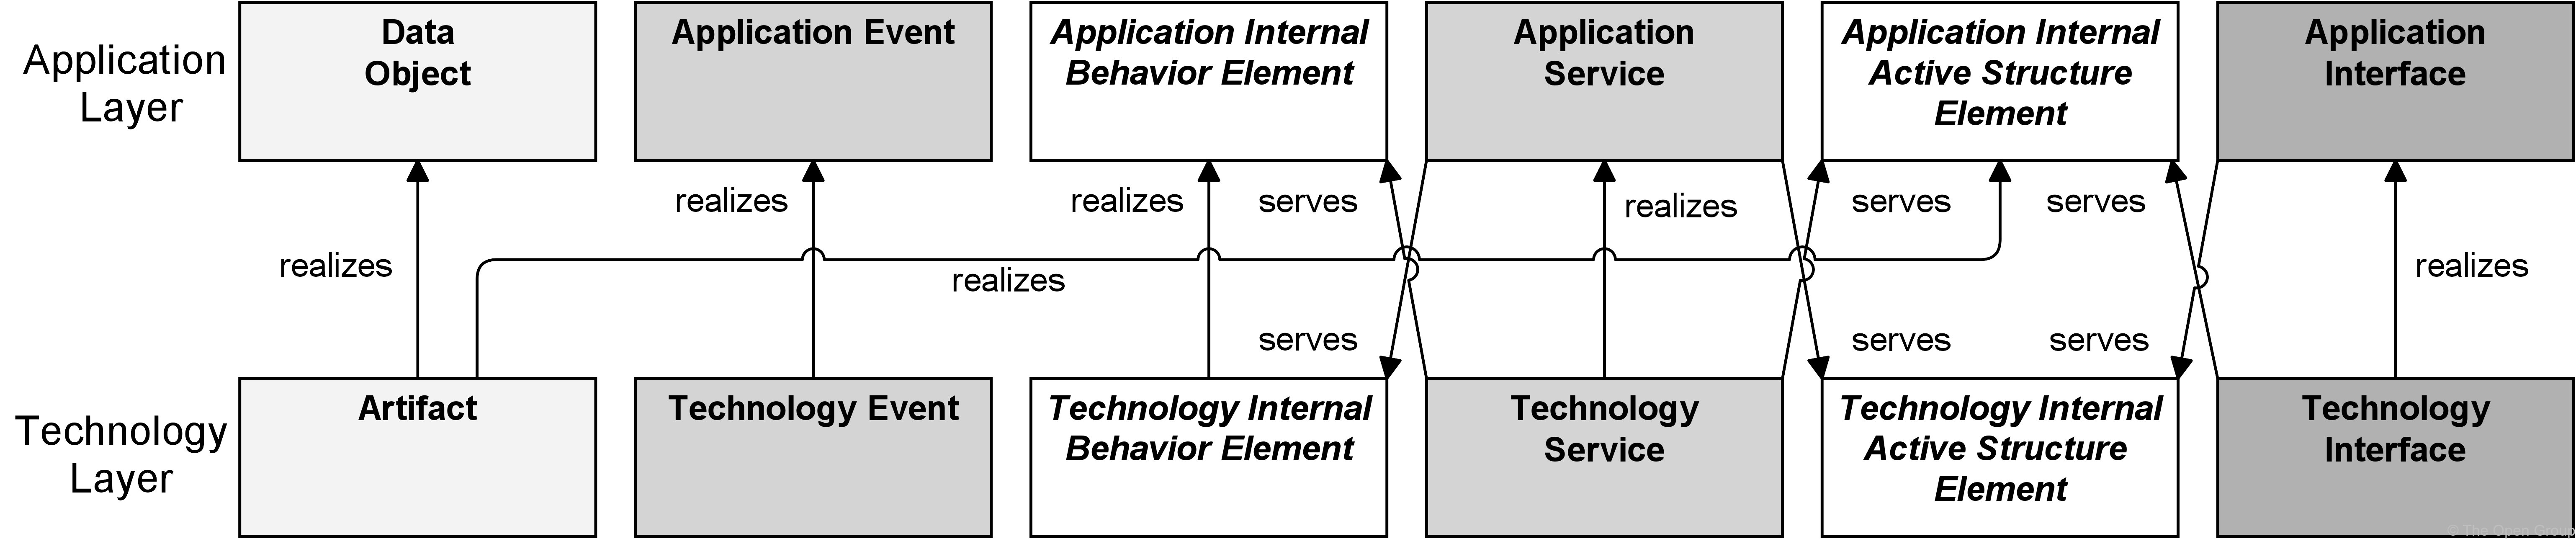 Relationships Between Application Layer and Technology Layer Elements